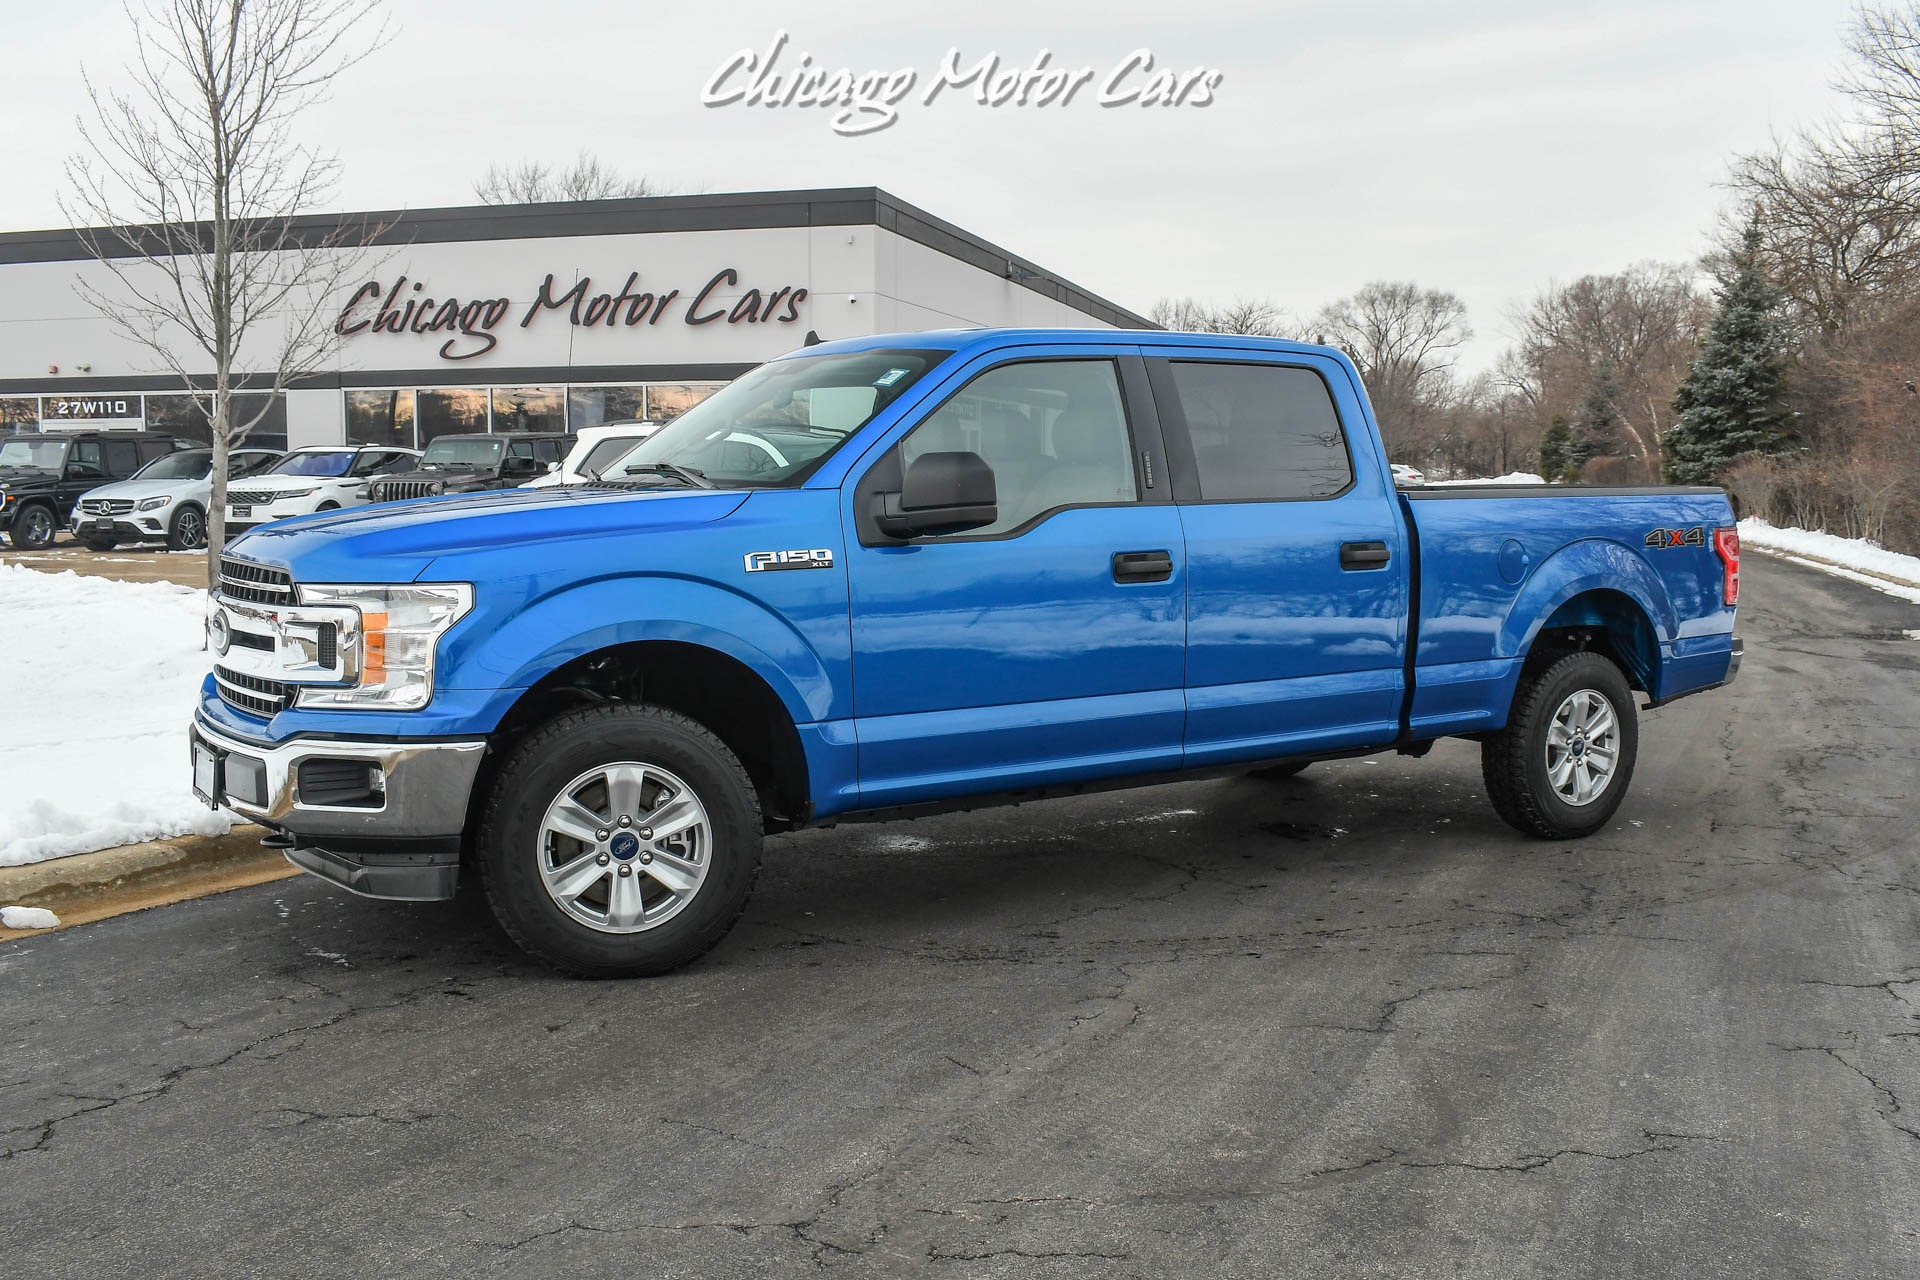 Used-2020-Ford-F150-XLT-Crew-Cab-Pickup-35L-Twin-Turbo-V6-EcoBoost-Backup-Camera-Only-16k-Mil